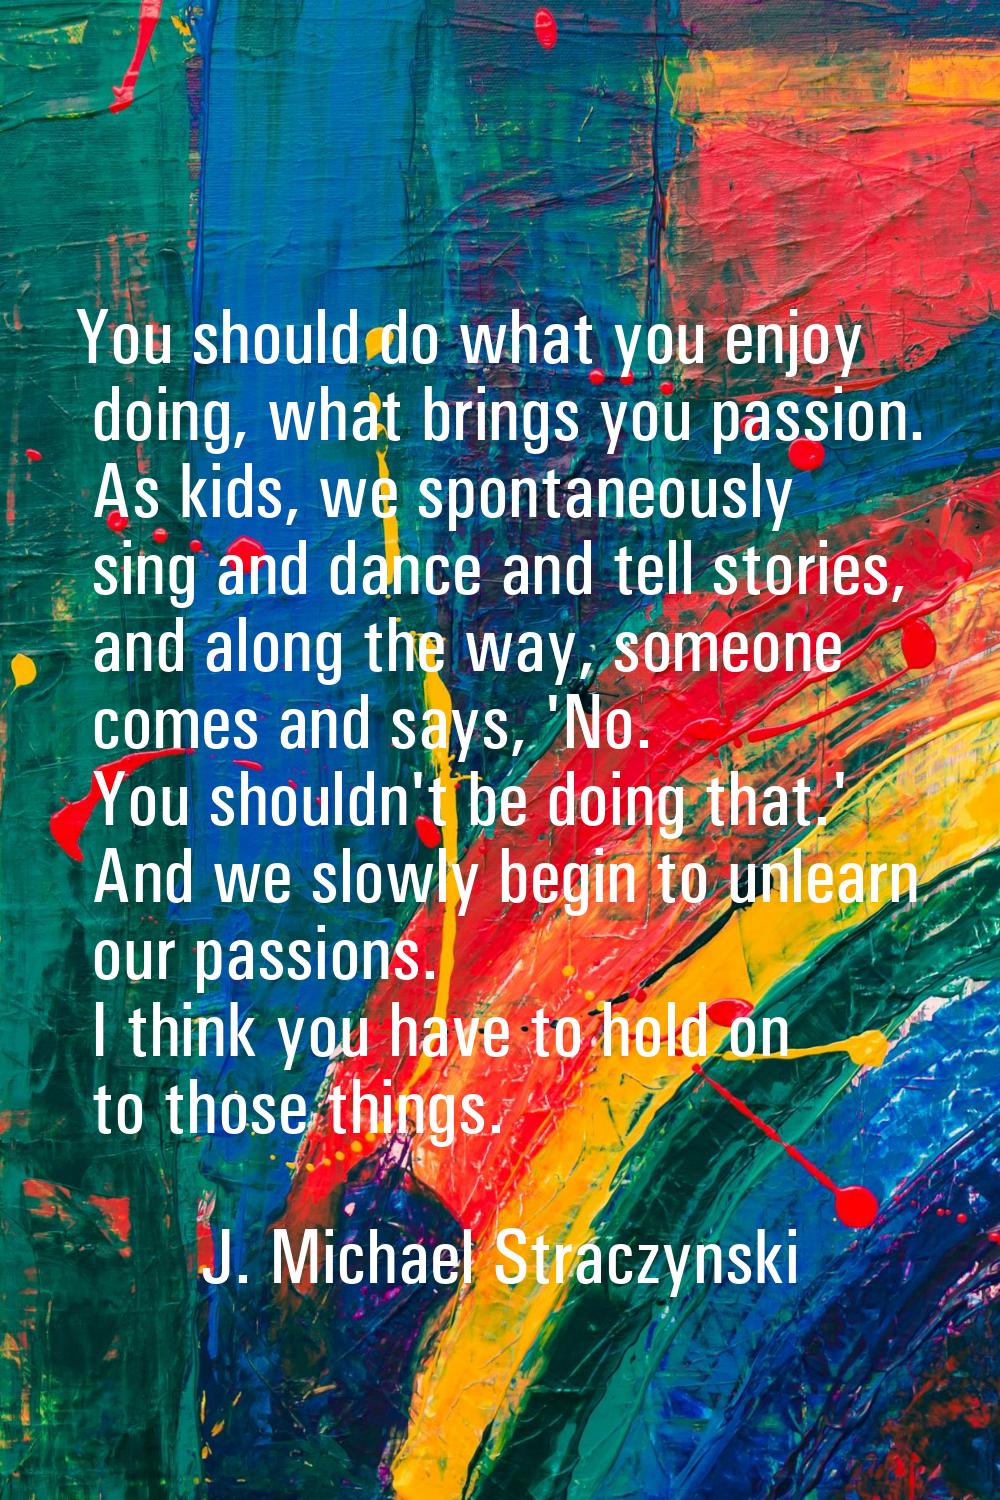 You should do what you enjoy doing, what brings you passion. As kids, we spontaneously sing and dan